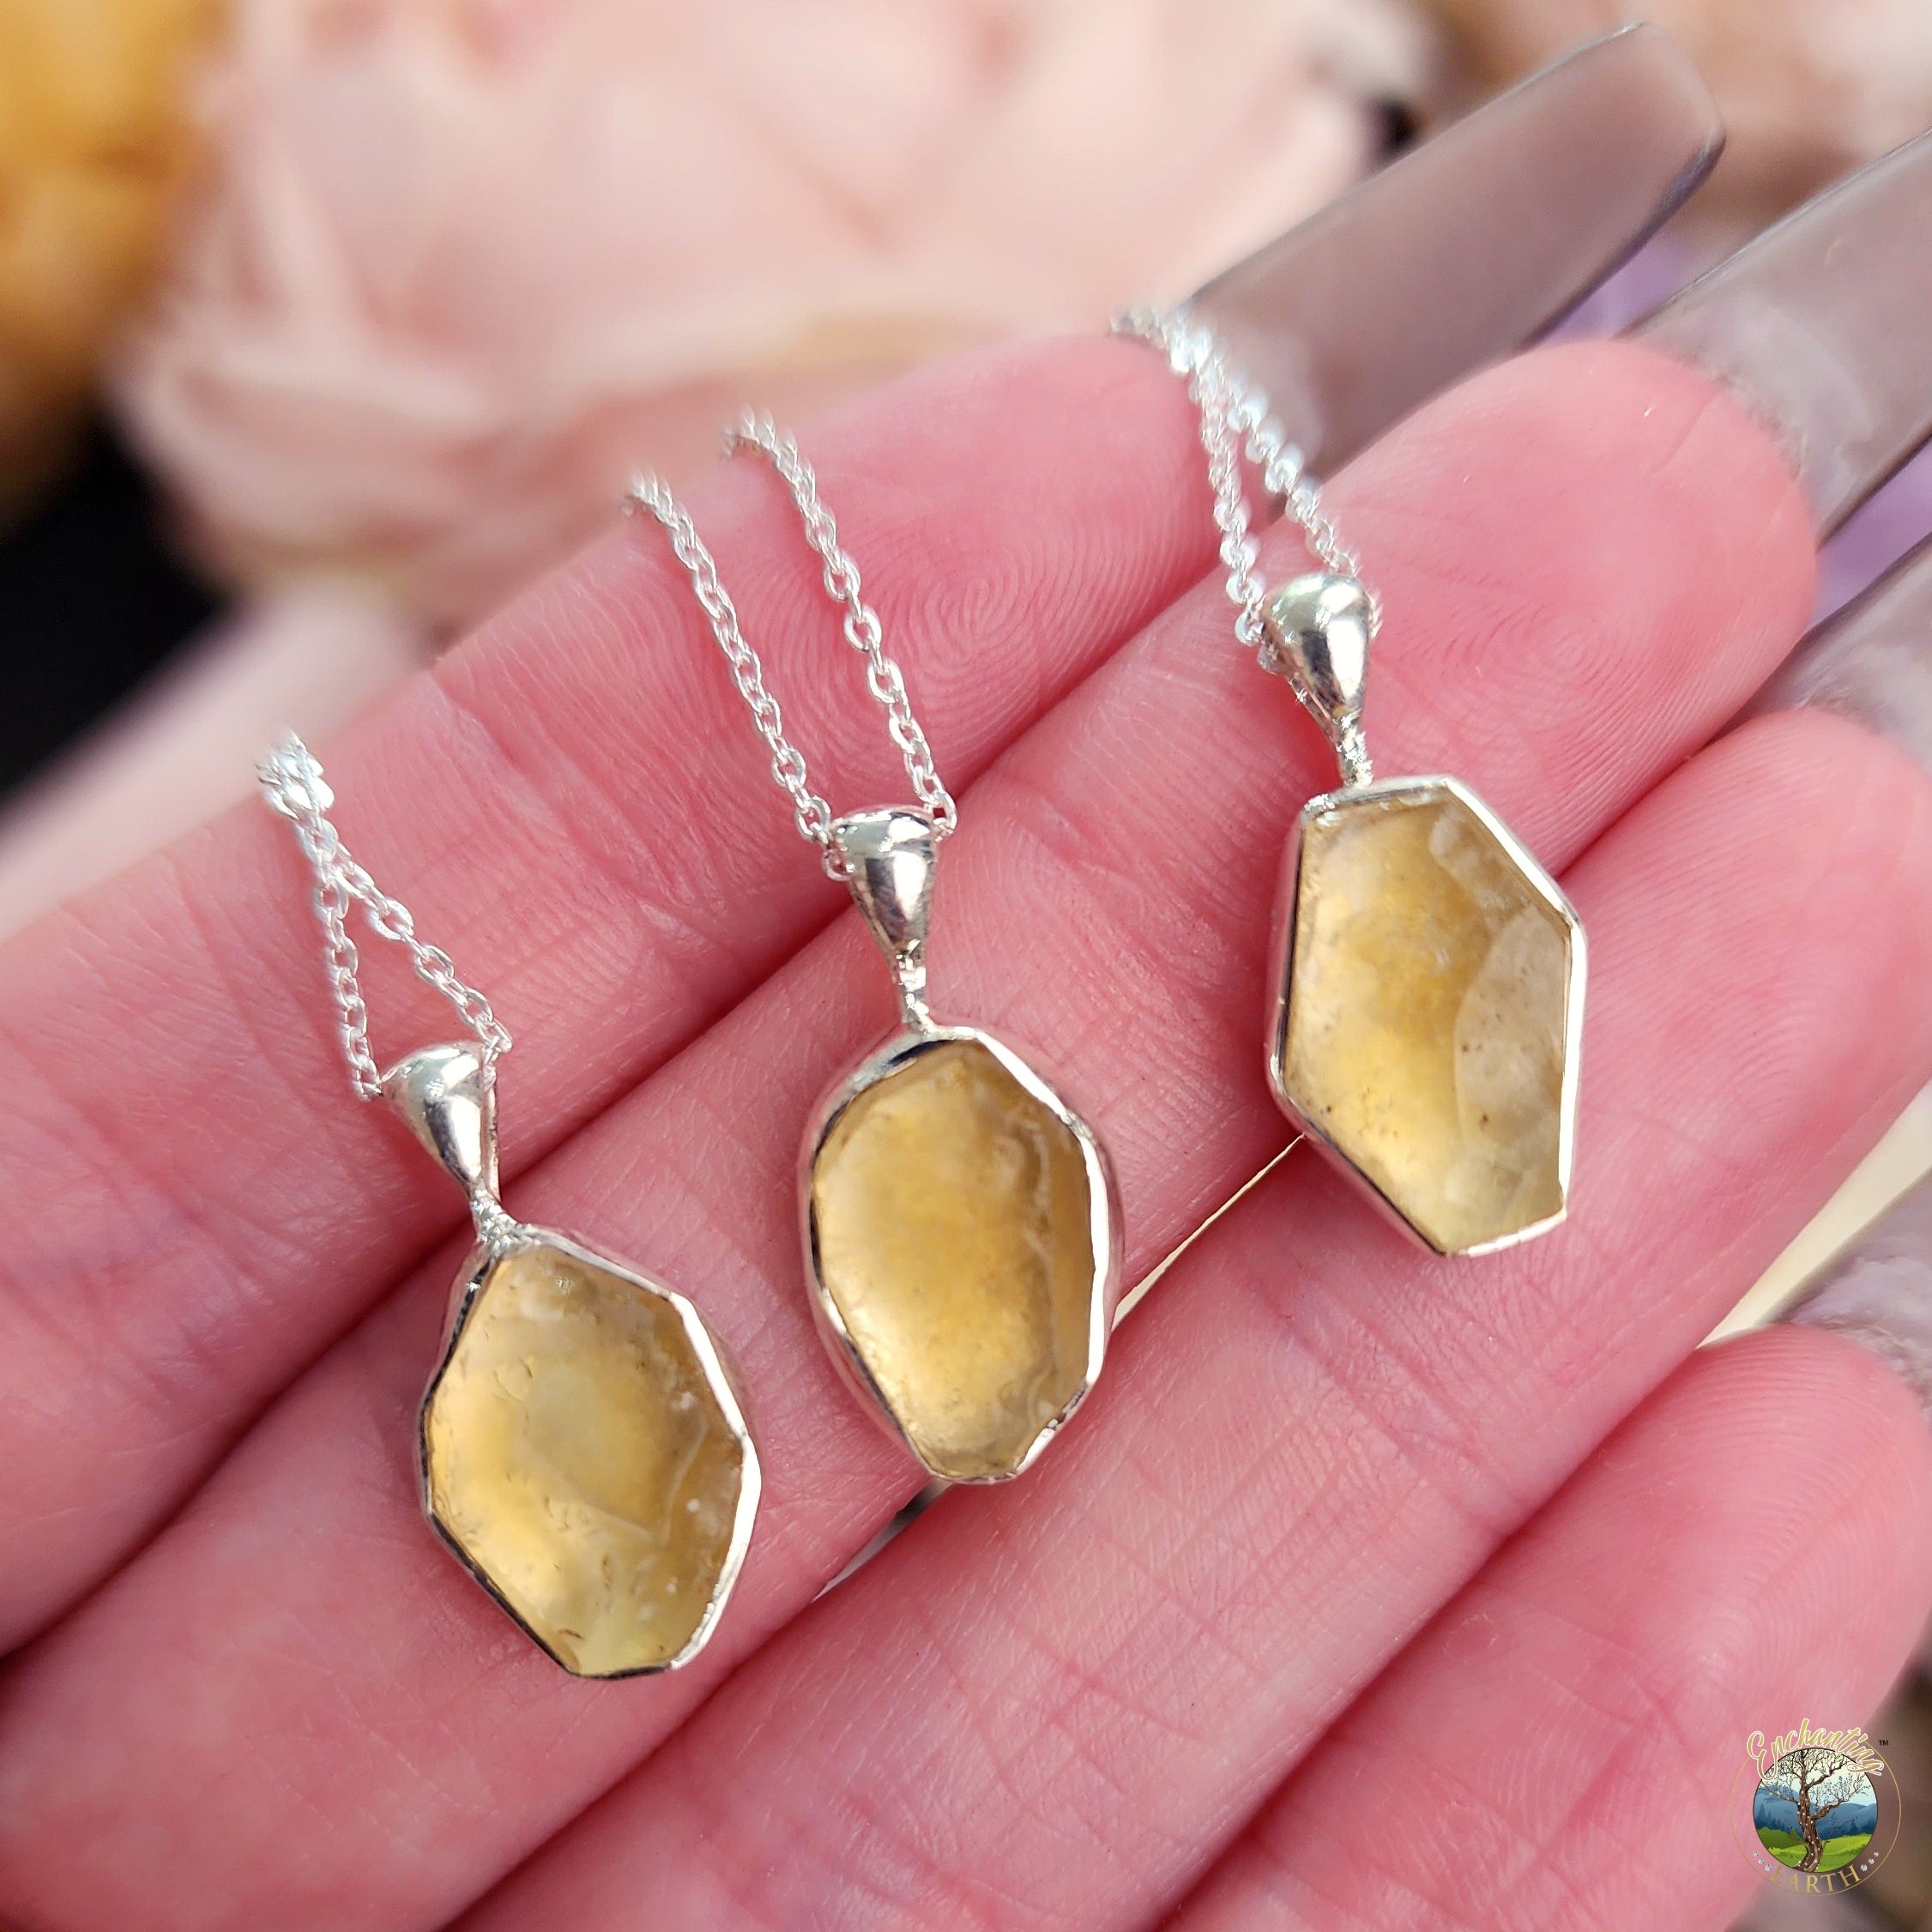 Libyan Desert Glass Raw Necklace .925 Silver for Ascension and Attracting your Desires